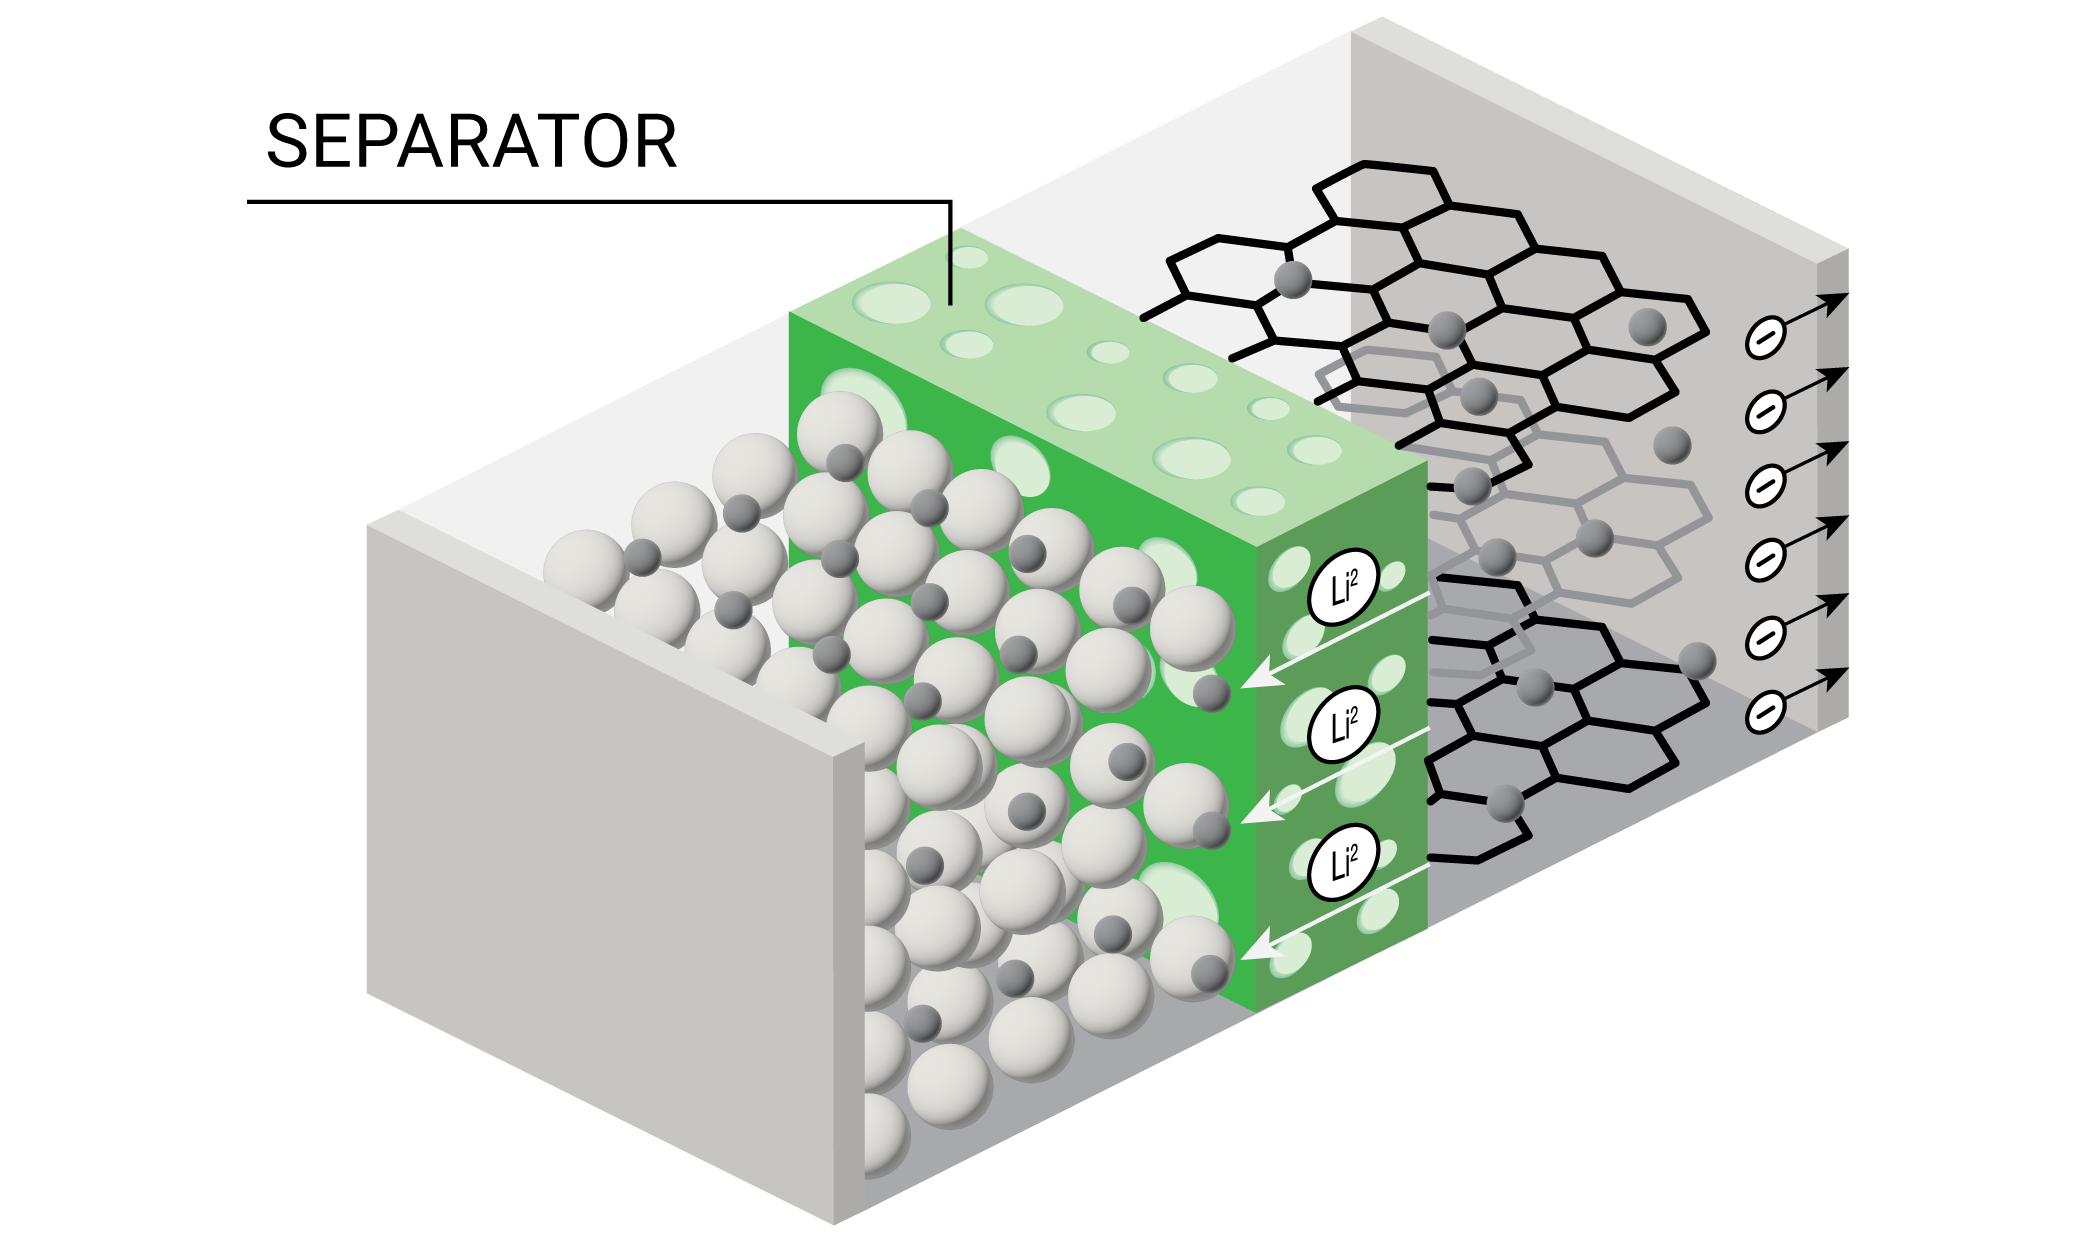 Figure 1. Diagram of Lithium Ion Battery